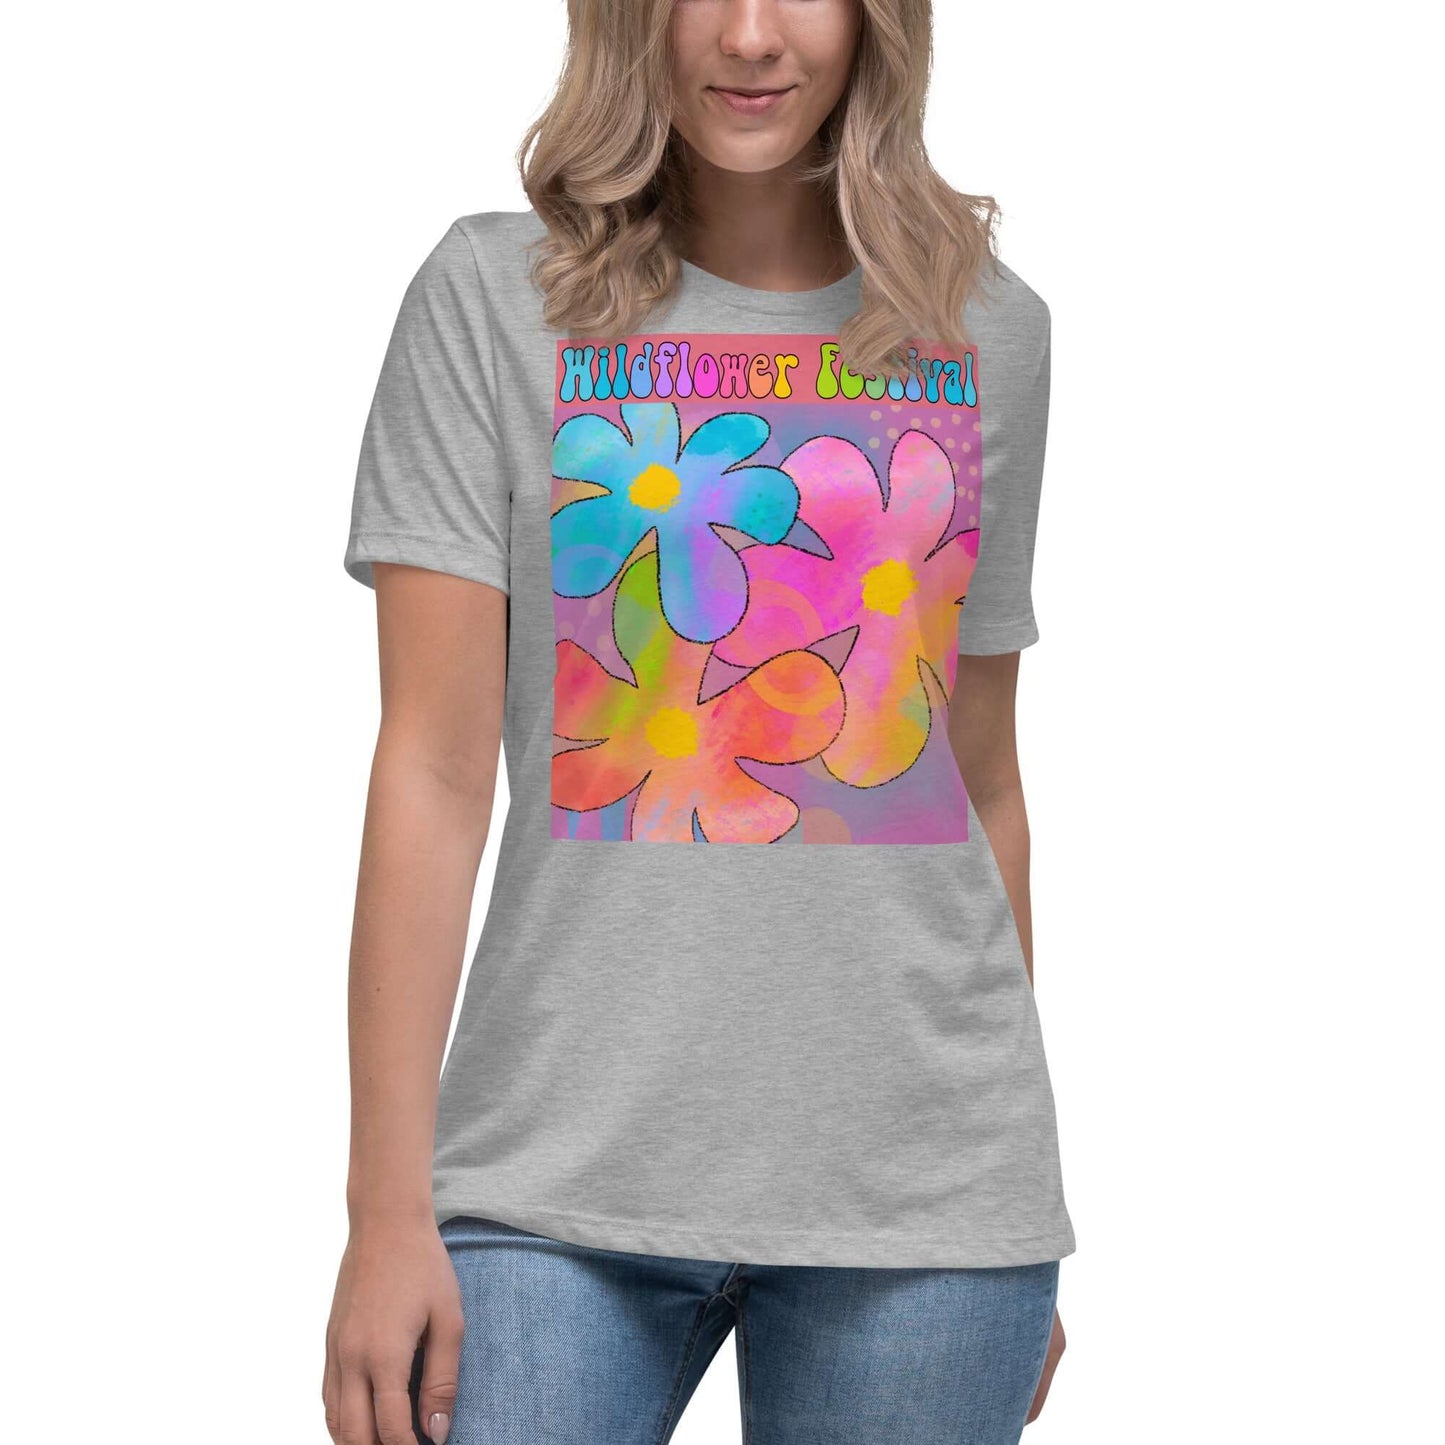 Big Colorful Hippie 1960s Psychedelic Flowers with Text “Wildflower Festival” Women’s Short Sleeve Tee in Athletic Heather Gray